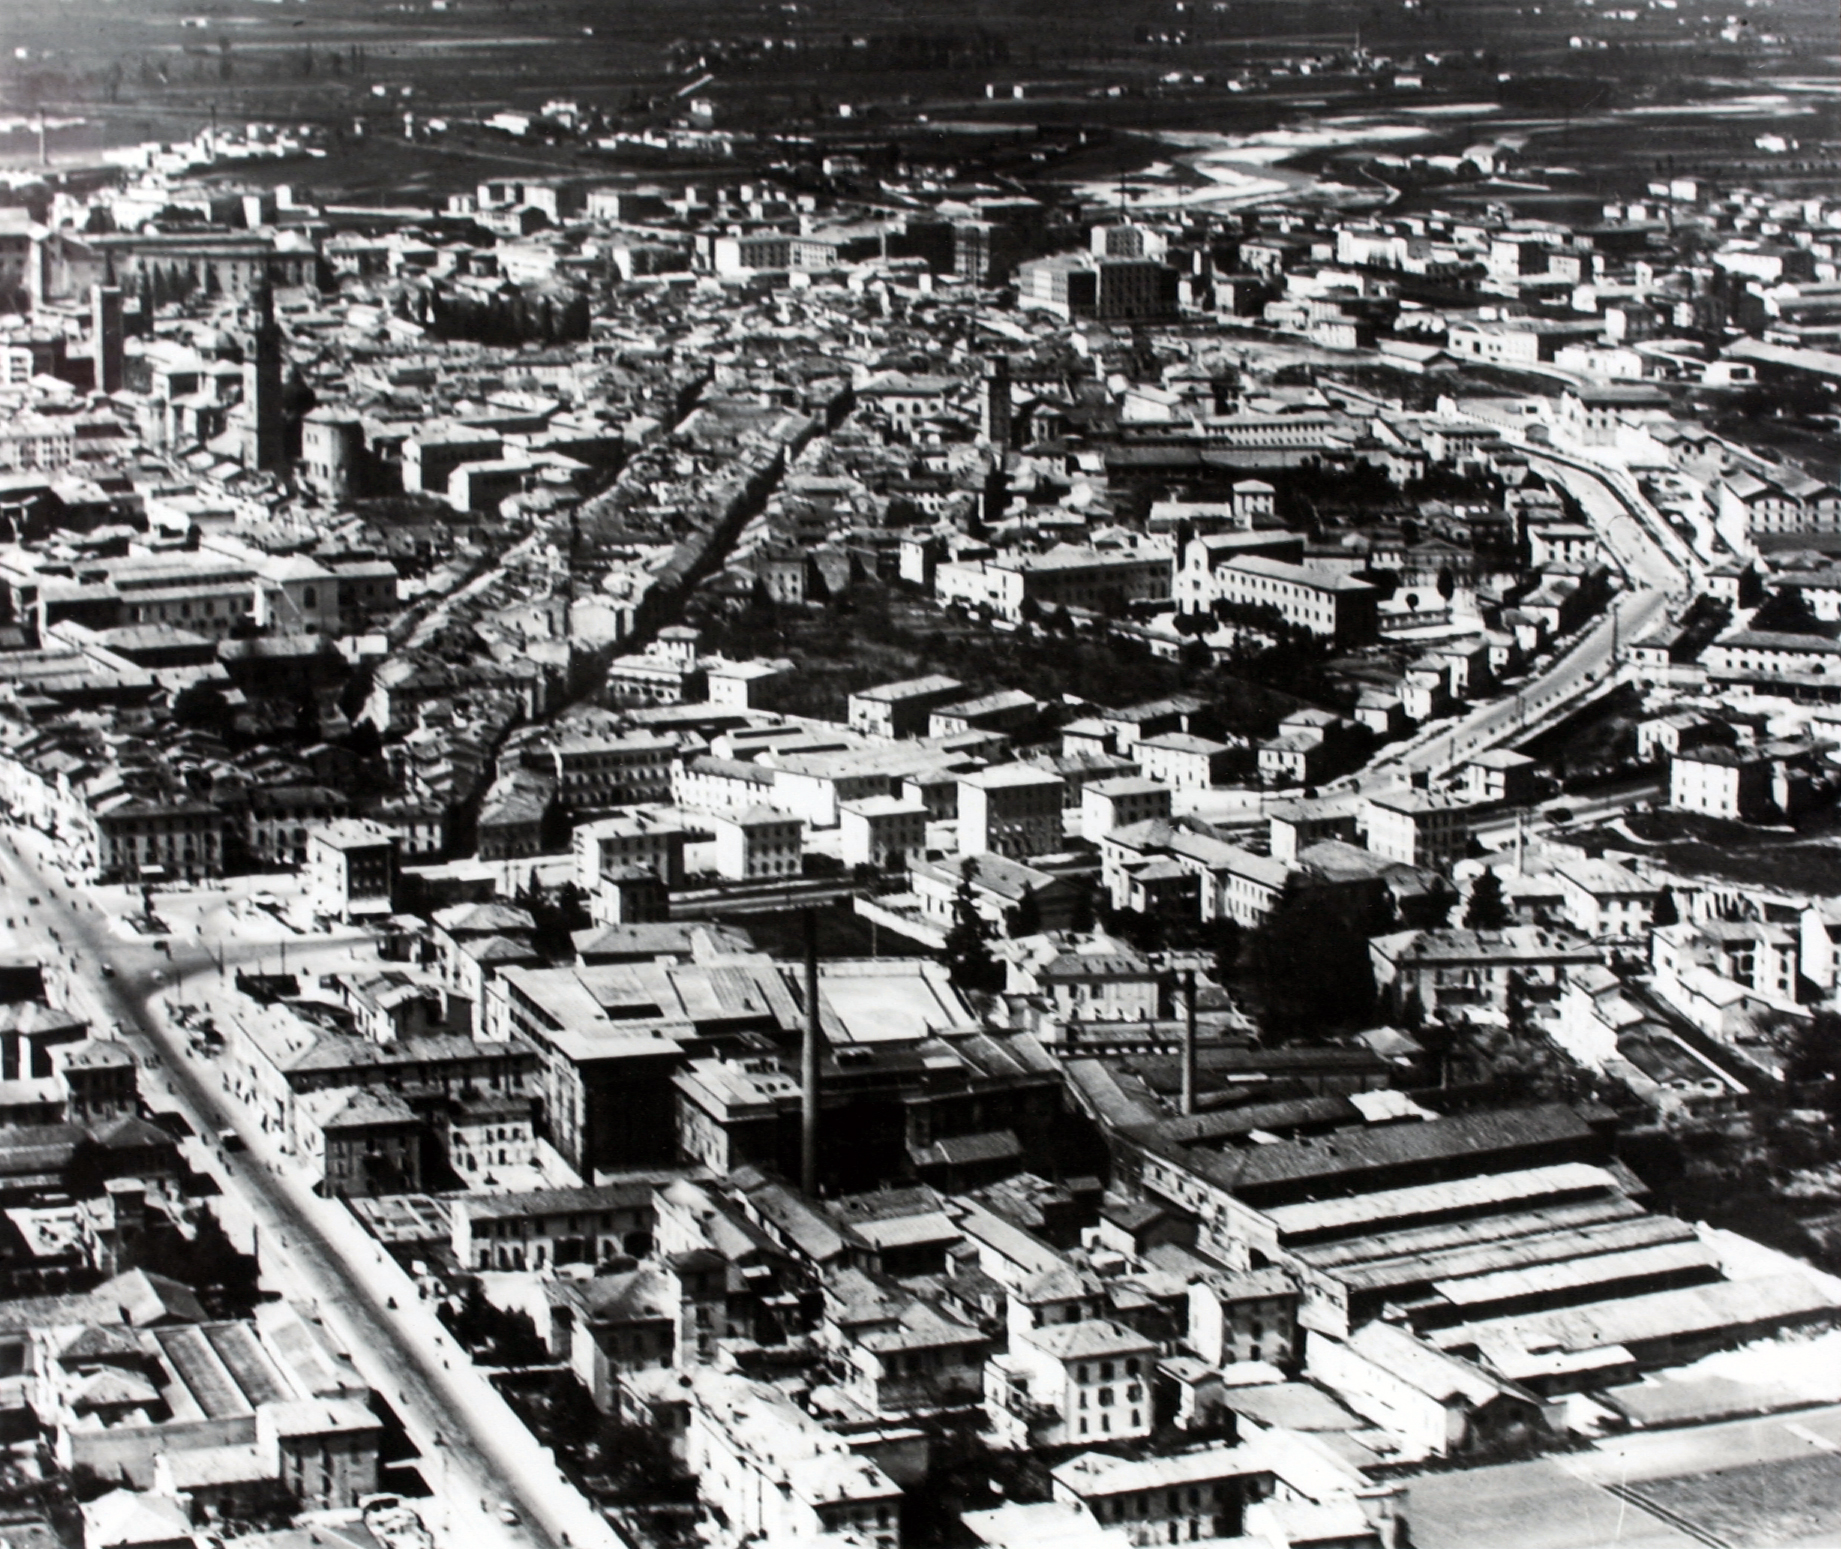 The extension of the factory emerges from the profile of the buildings in the urban fabric of Parma, here in a view from above dating to 1950 [ASB, Aa 502] in the eastern area immediately behind the old outline of the walls, touching via Emilia, visible i